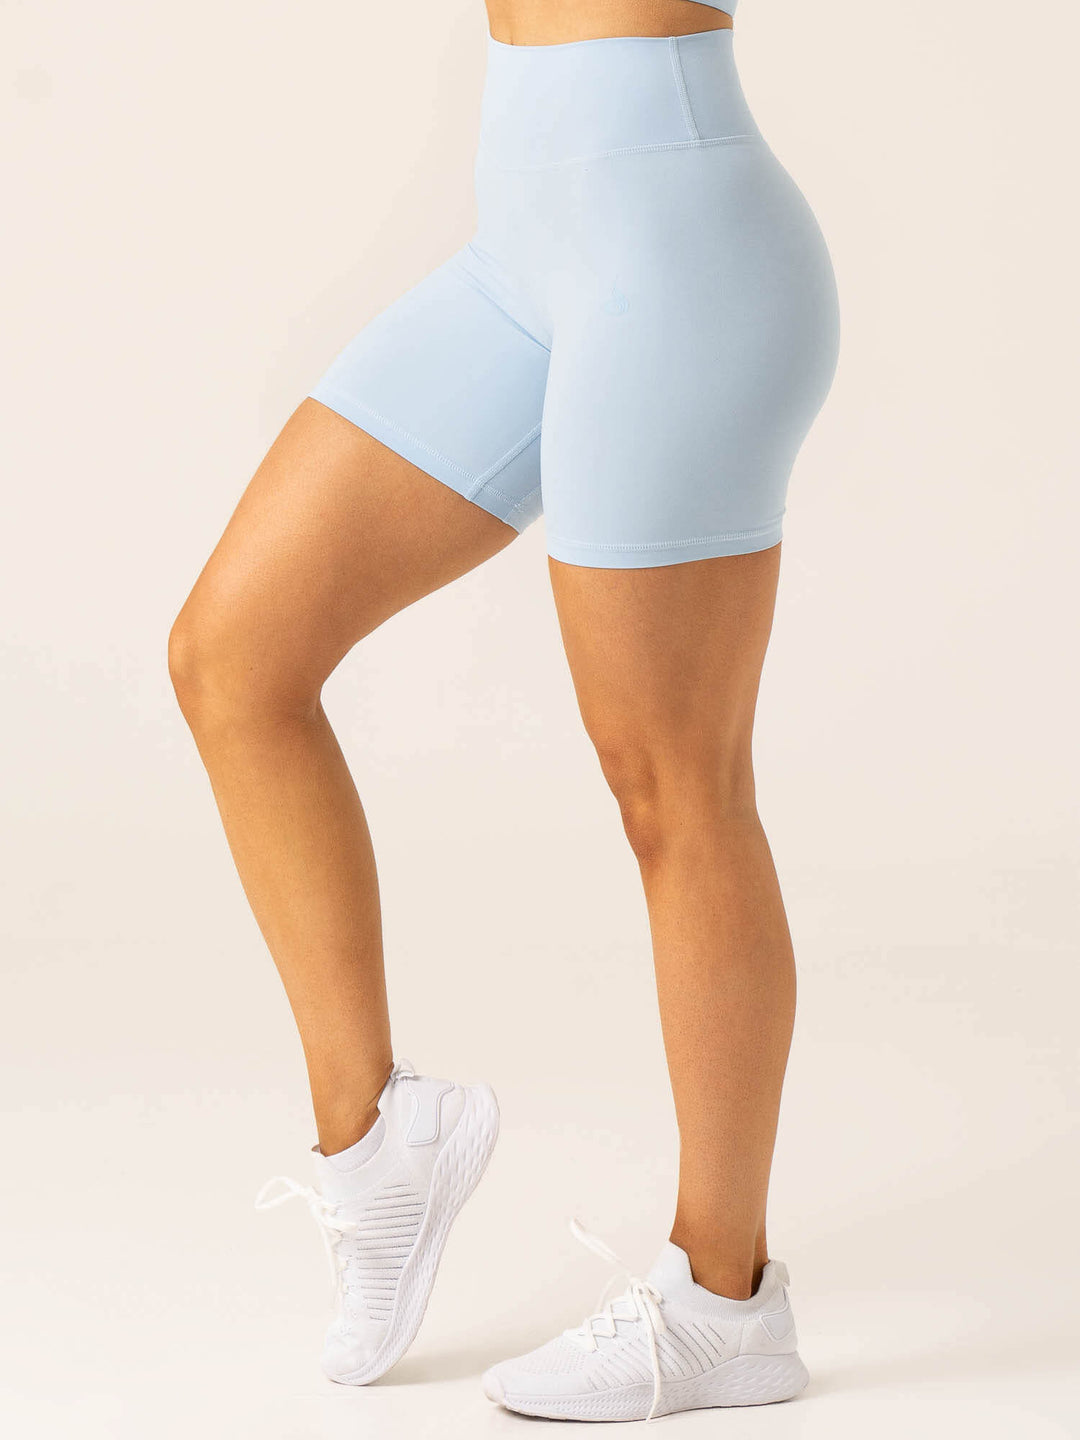 NKD Arch Mid-Length Shorts - Baby Blue Clothing Ryderwear 